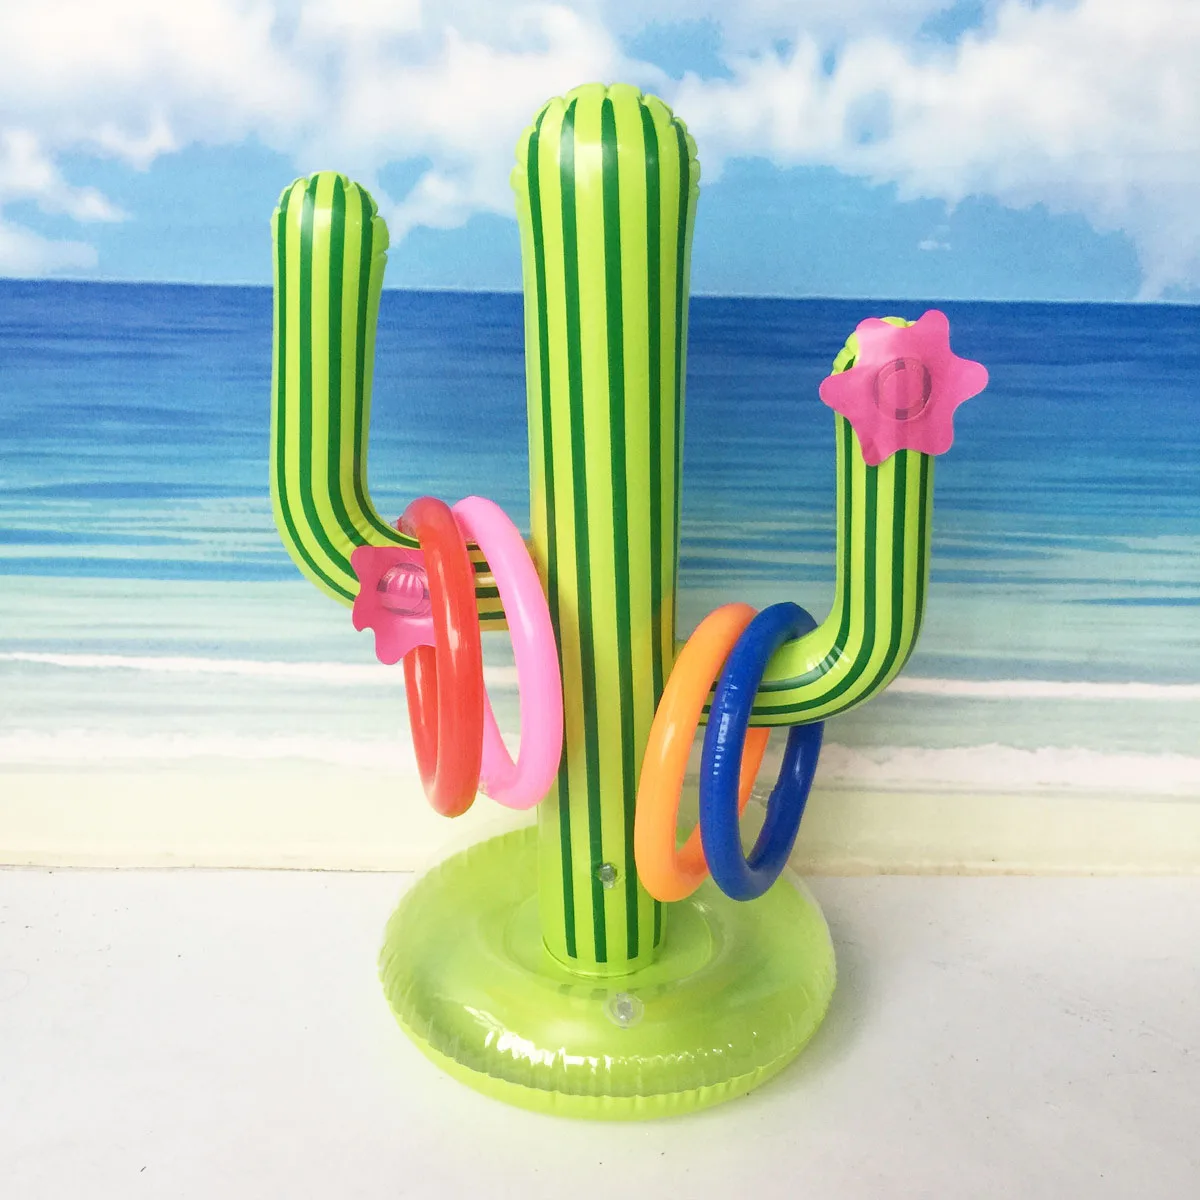 Cactus Swimming Pool Ring Toss Games Inflatable Pool Toys With 4 Ring Summer - £9.77 GBP